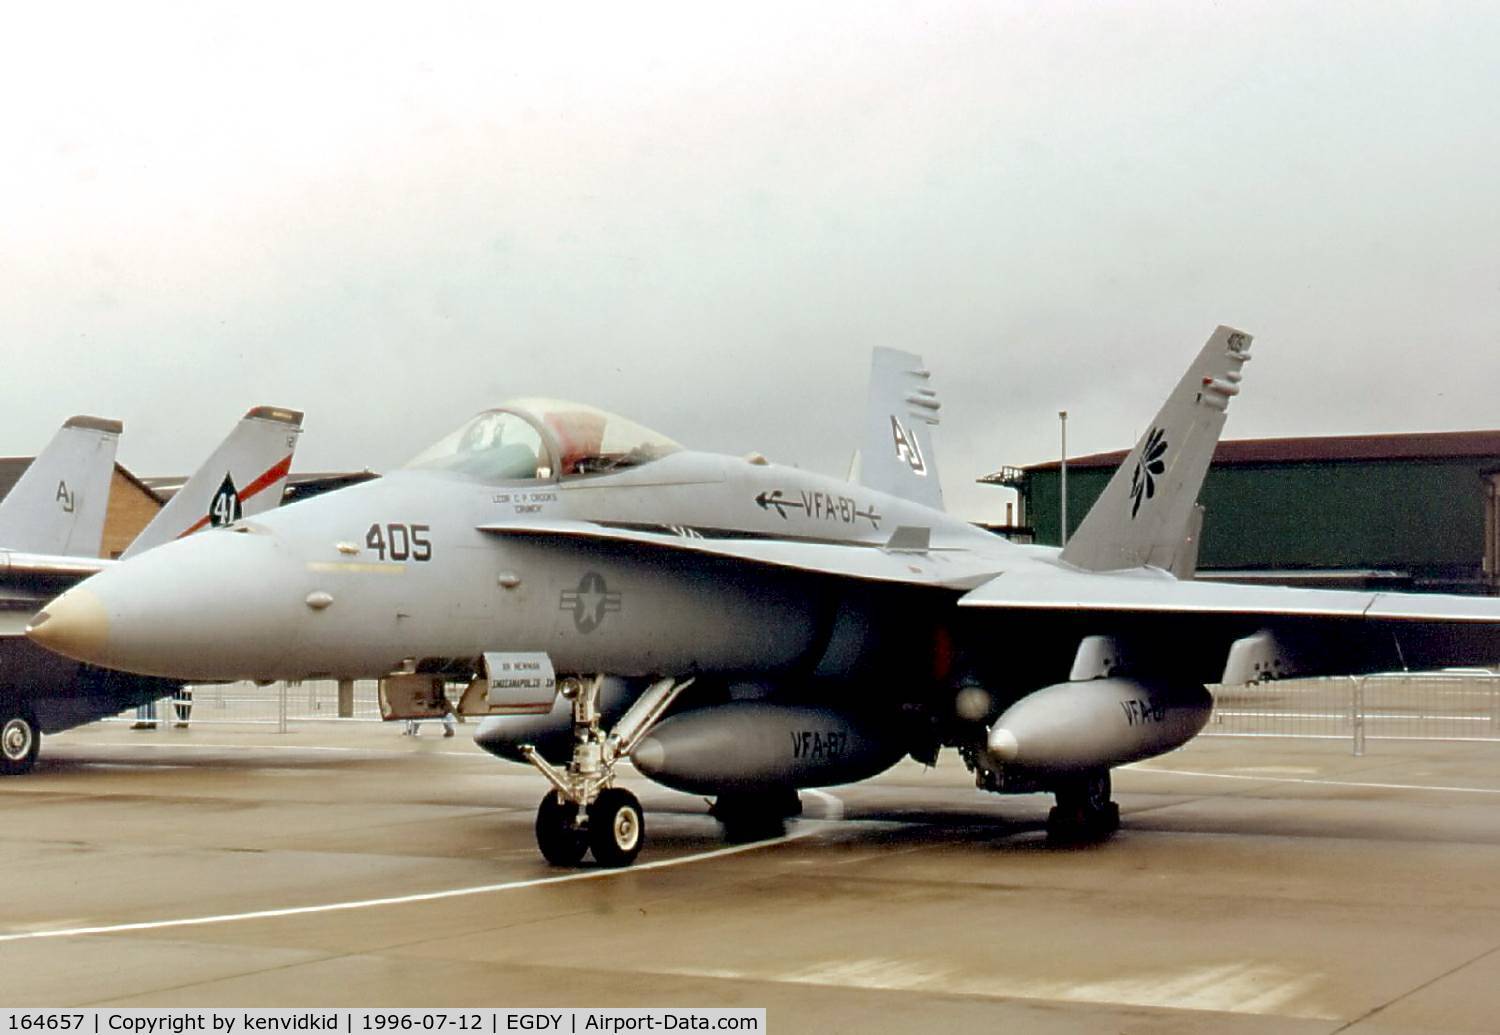 164657, 1992 McDonnell Douglas F/A-18C Hornet C/N 1084/C280, At the 1996 photocall prior to the Yeovilton Air Show.